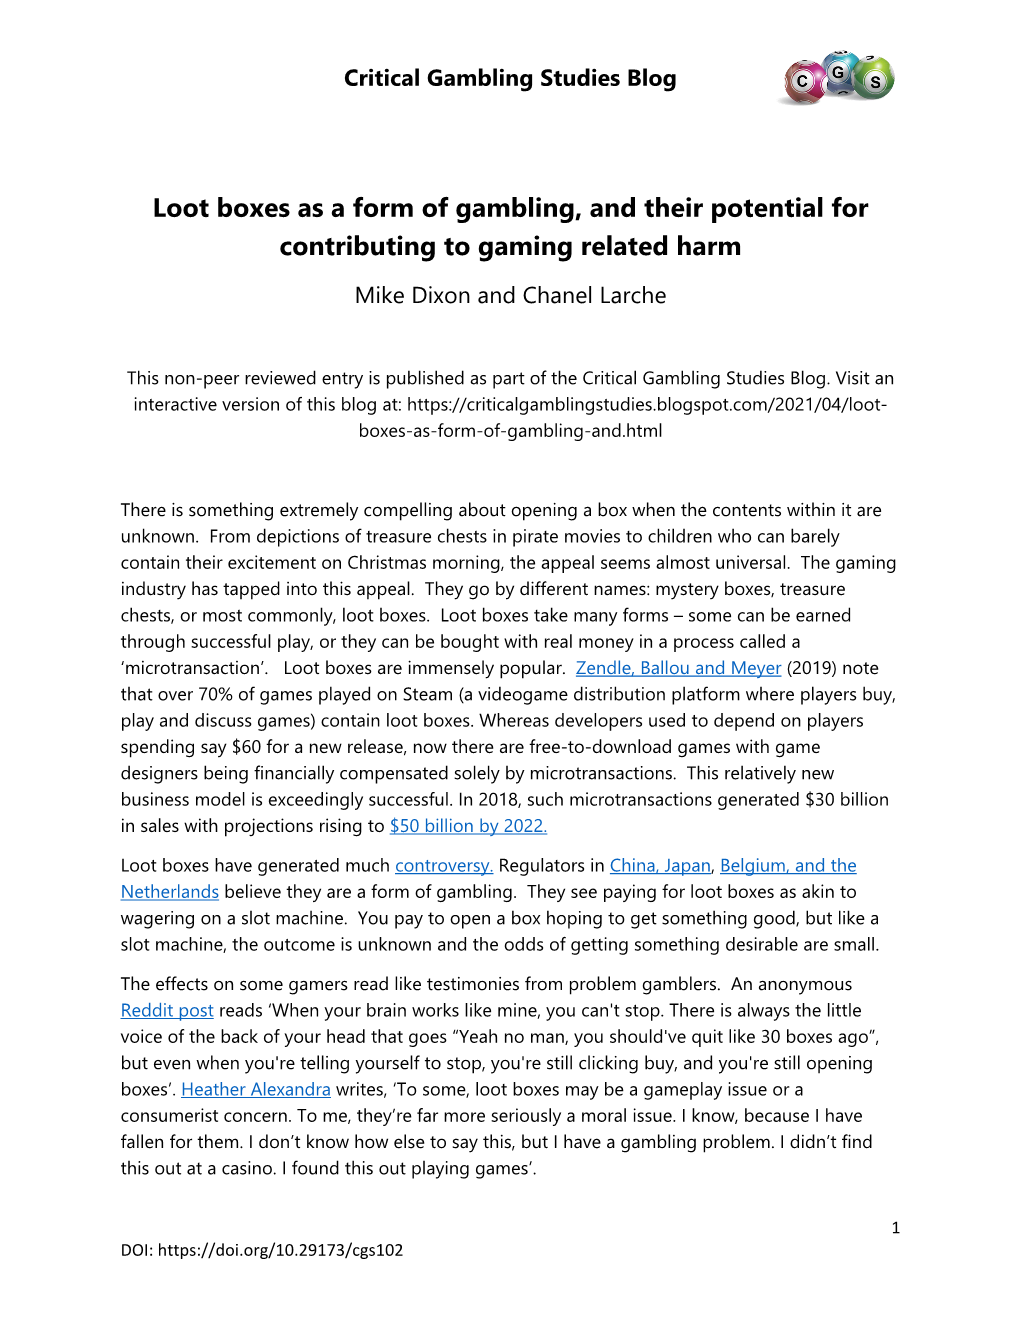 Loot Boxes As a Form of Gambling, and Their Potential for Contributing to Gaming Related Harm Mike Dixon and Chanel Larche